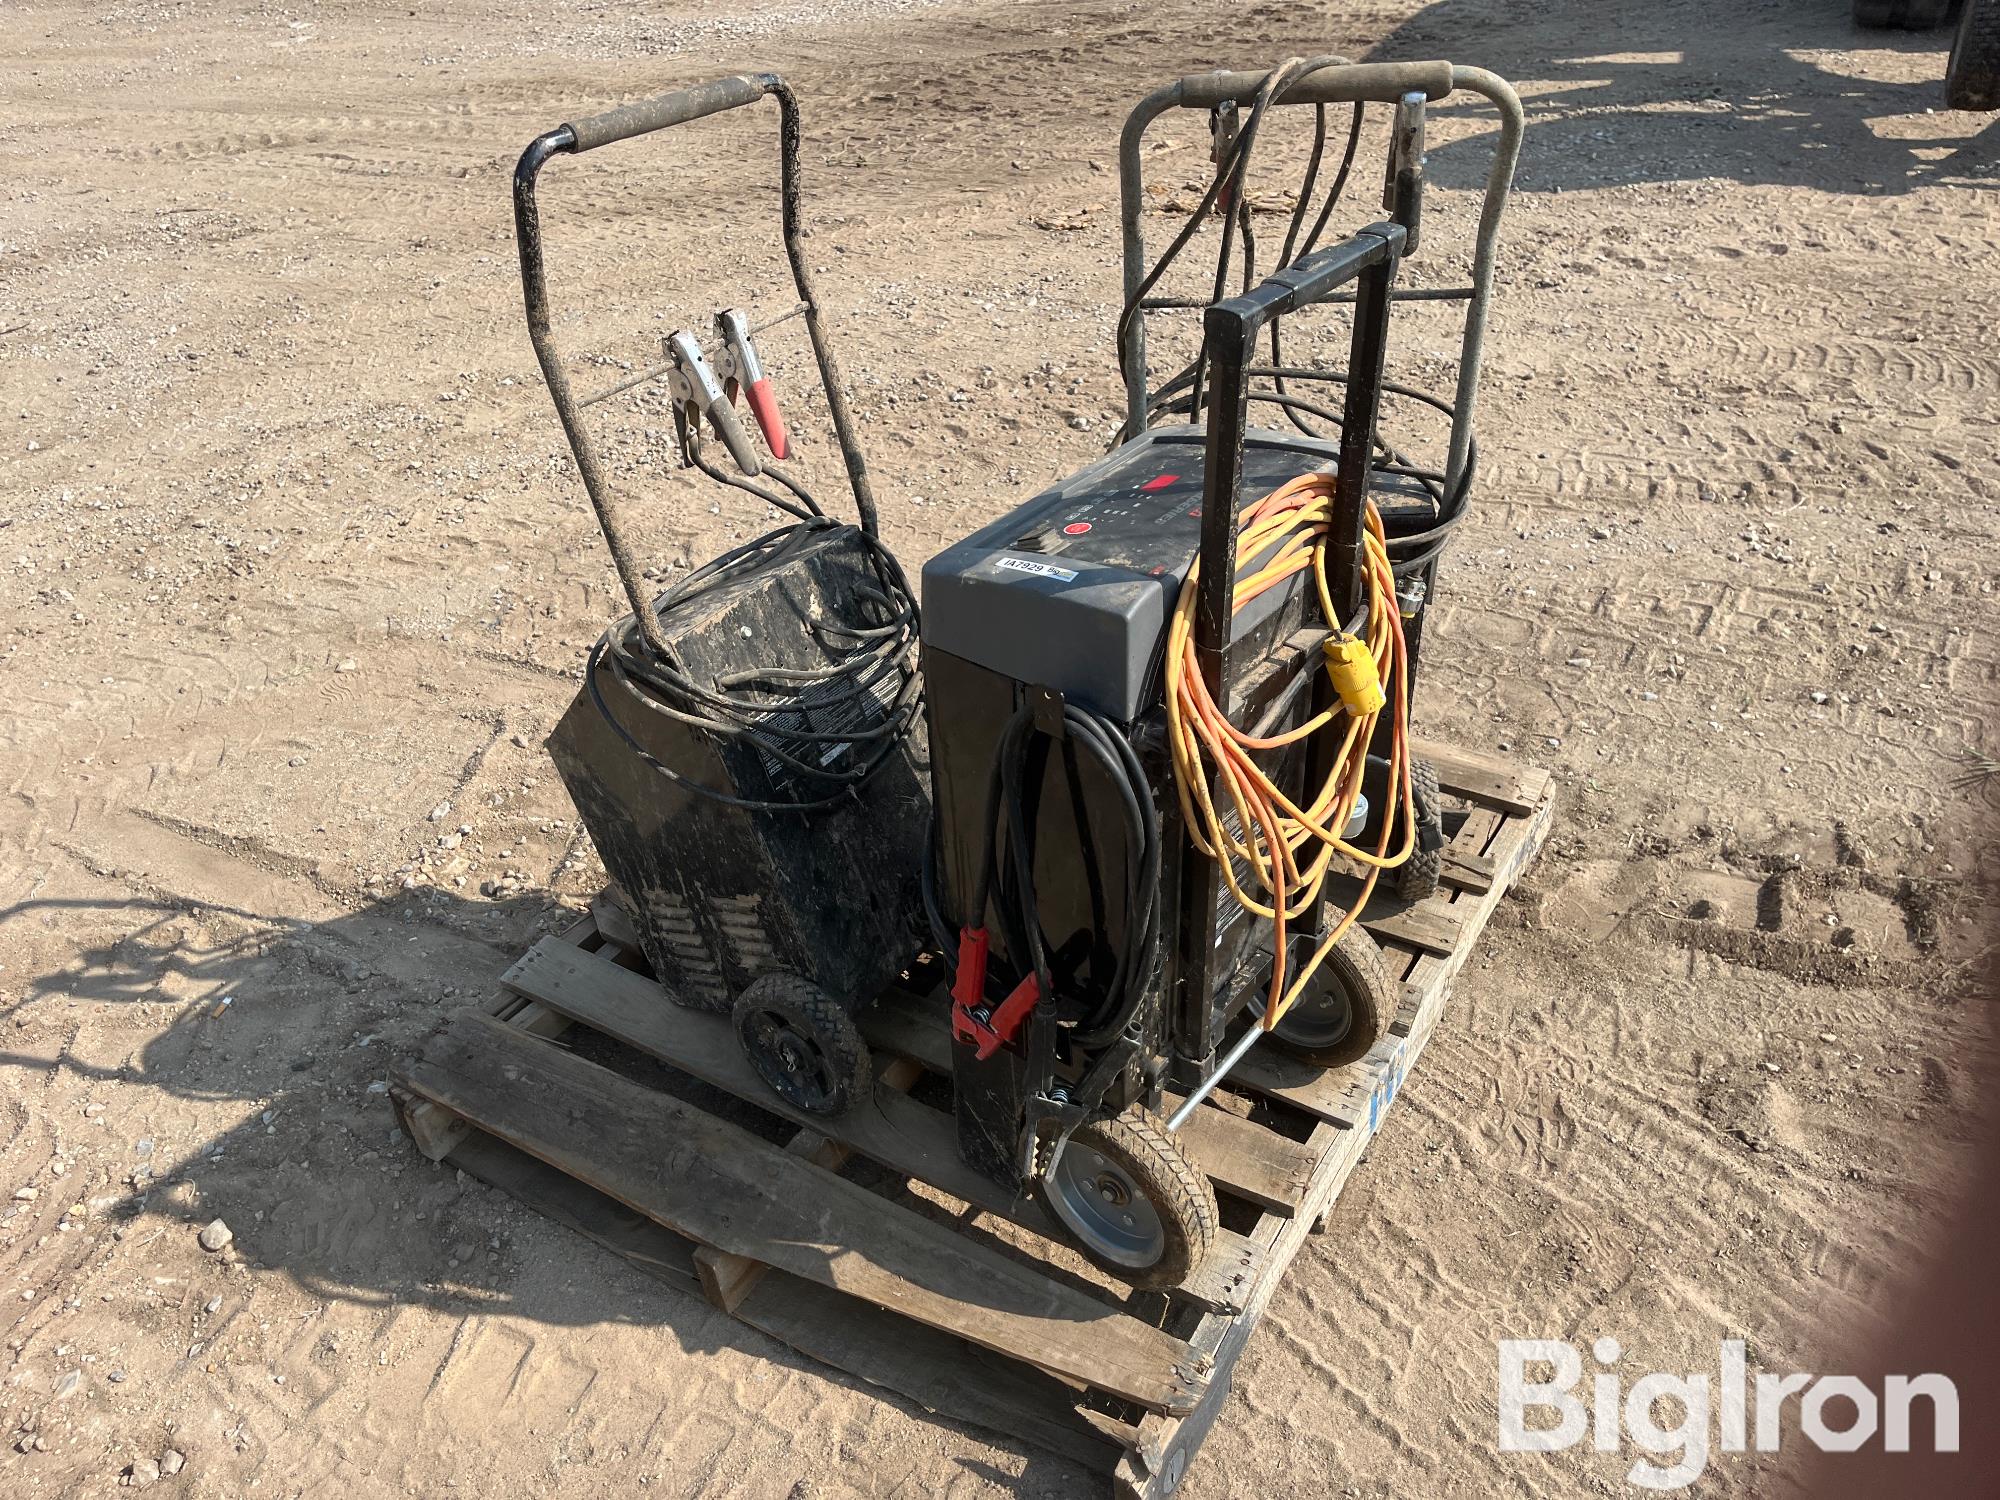 Battery Chargers BigIron Auctions